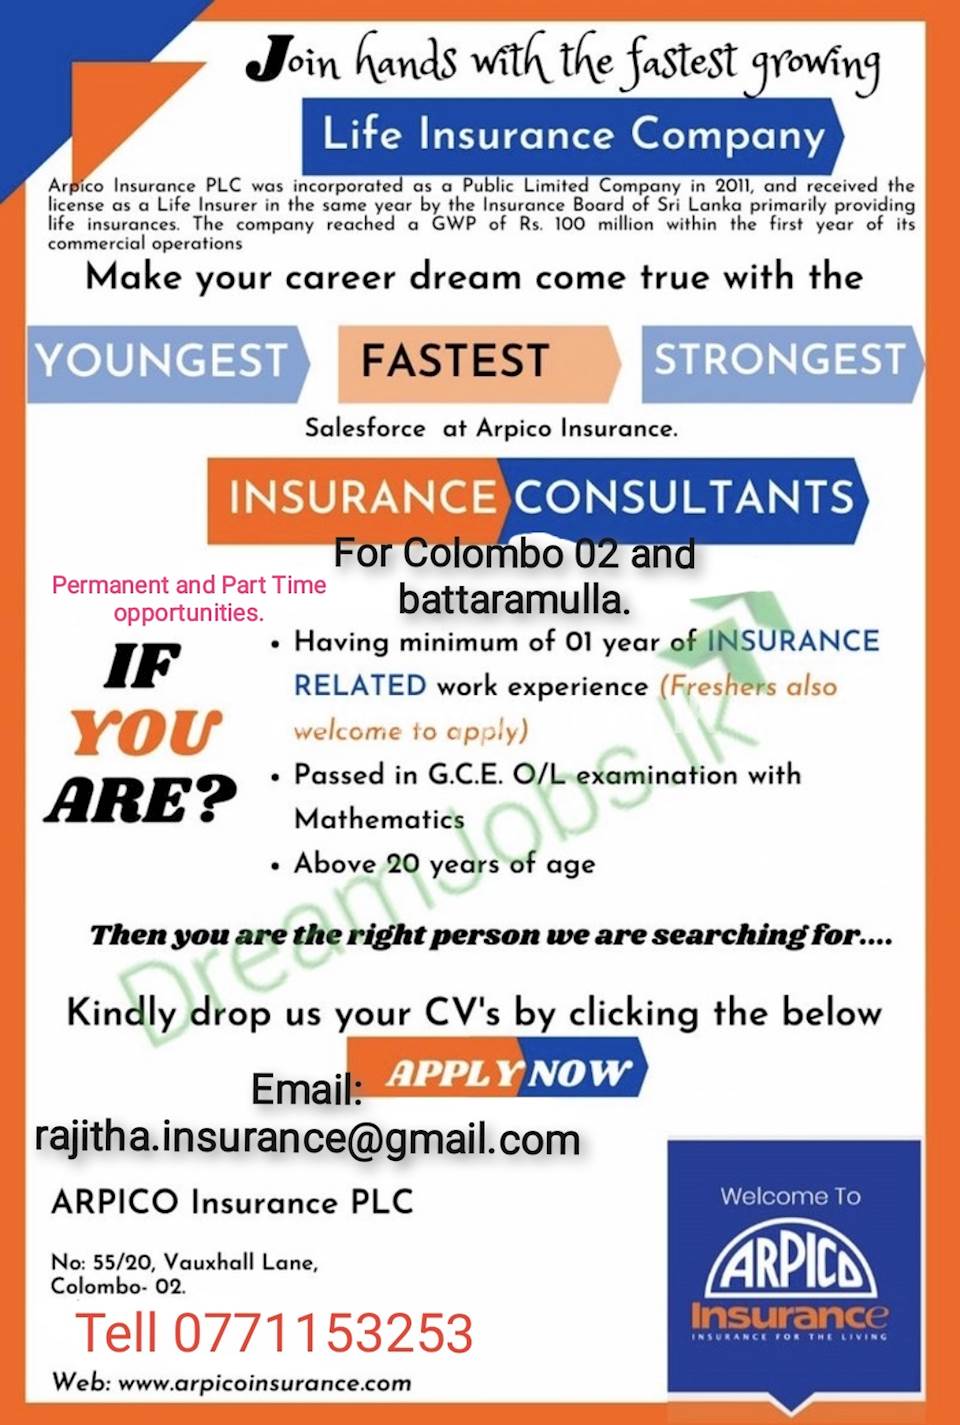 Life Insurance Consultant and Sales Executives..